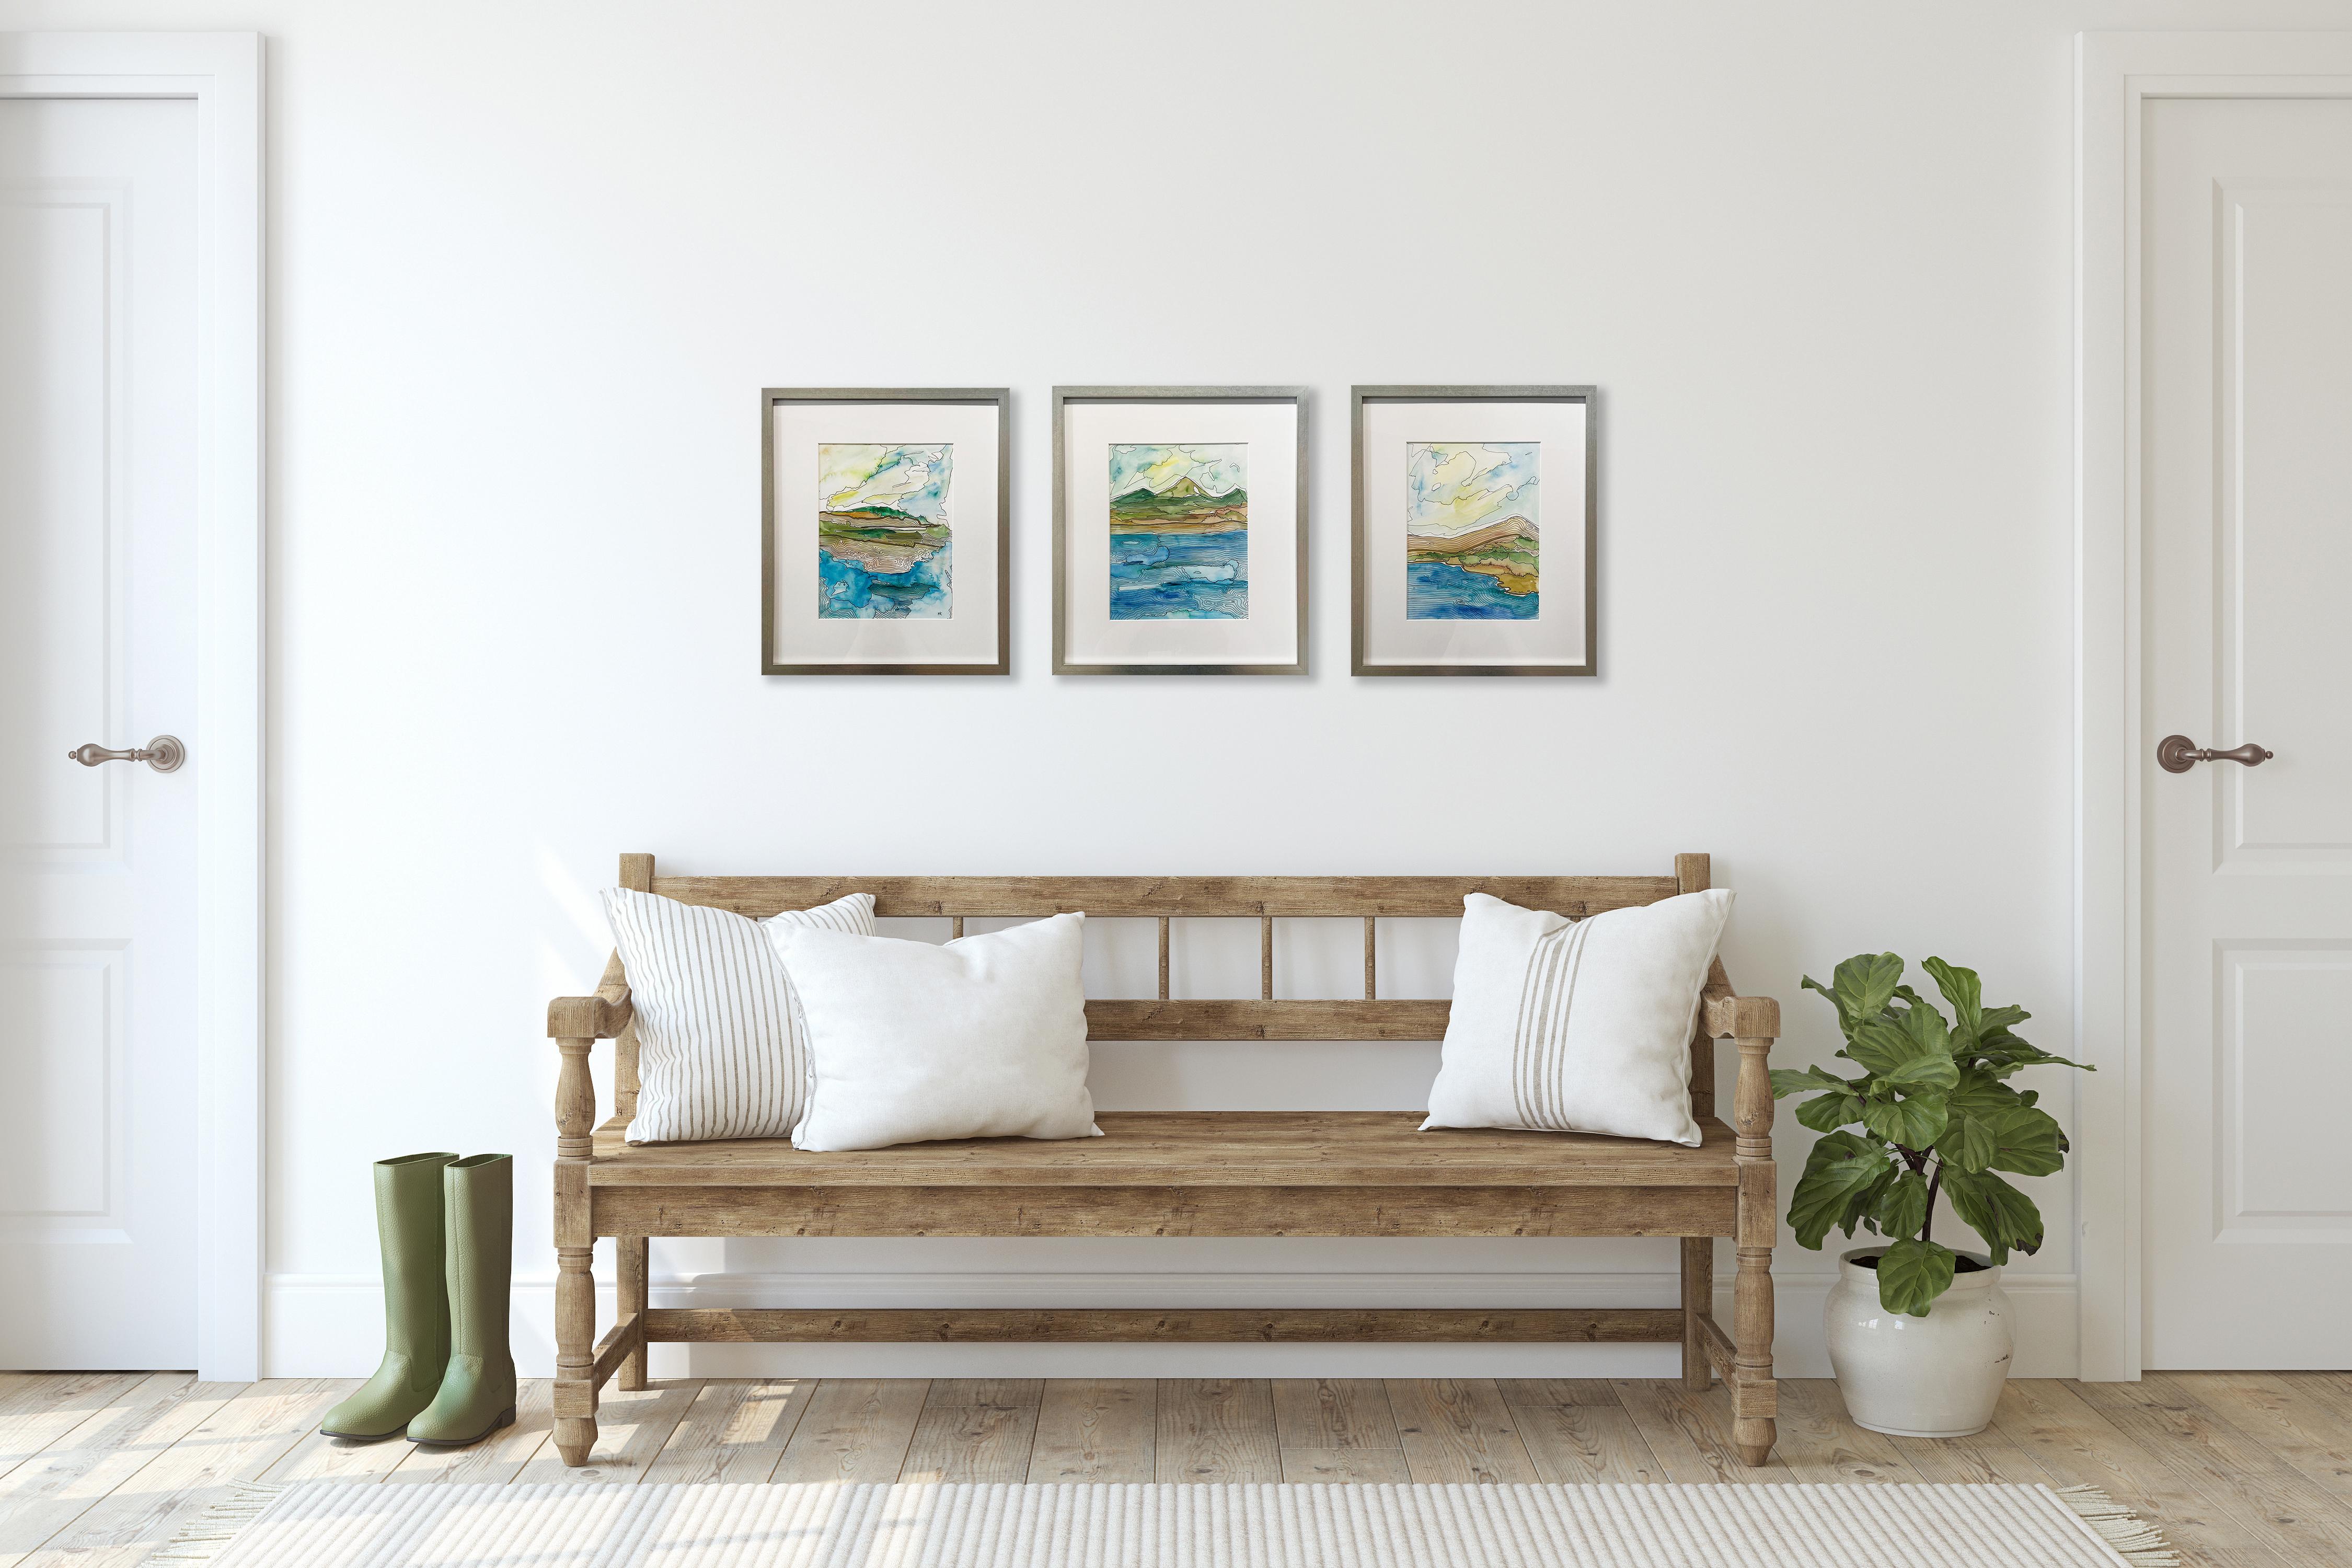 This abstract landscape painting by Melissa Kircher is made with watercolor and ink on paper. It features intricate line work over washes of paint to create a whimsical coastal hill-scape scene in a cool and earthy palette. The painting itself is